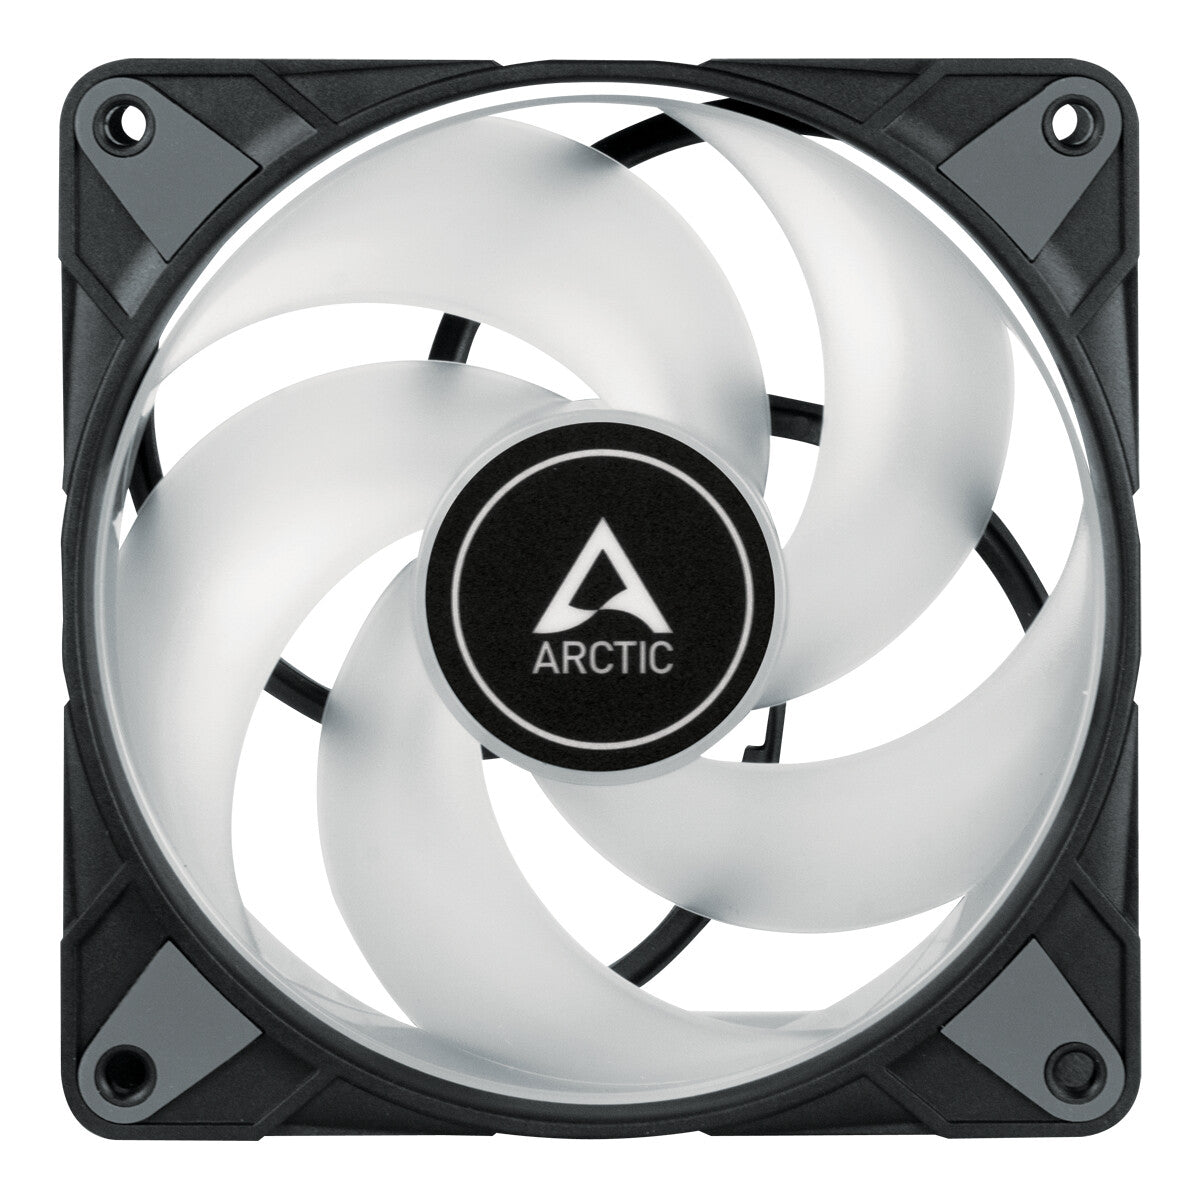 ARCTIC P12 PWM PST A-RGB 0dB - Computer Case Fan in Black / White - 120mm